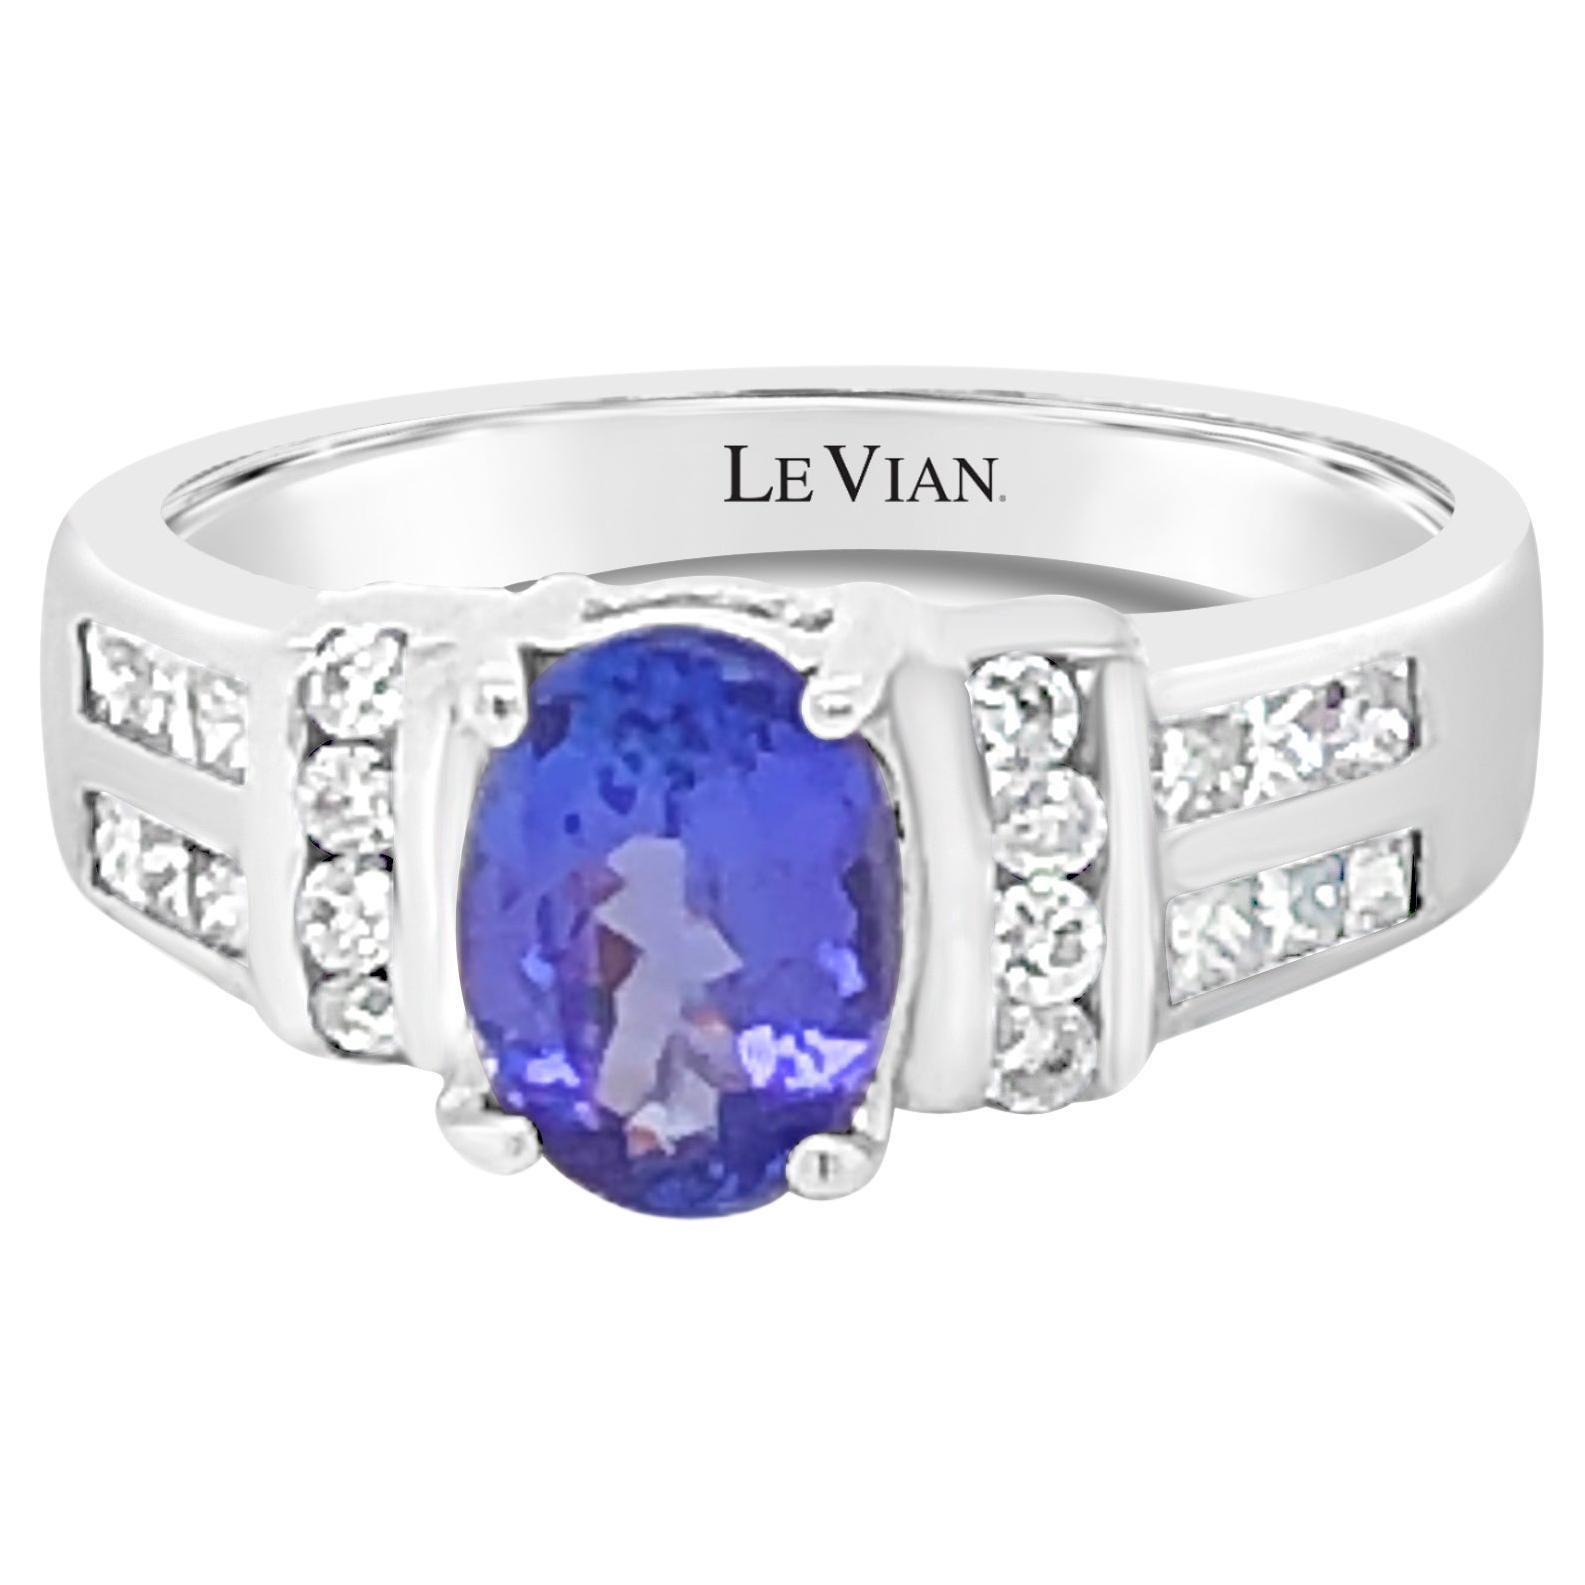 Levian Blue Tanzanite And Diamond Ring In 14K White Gold Size 7 For Sale